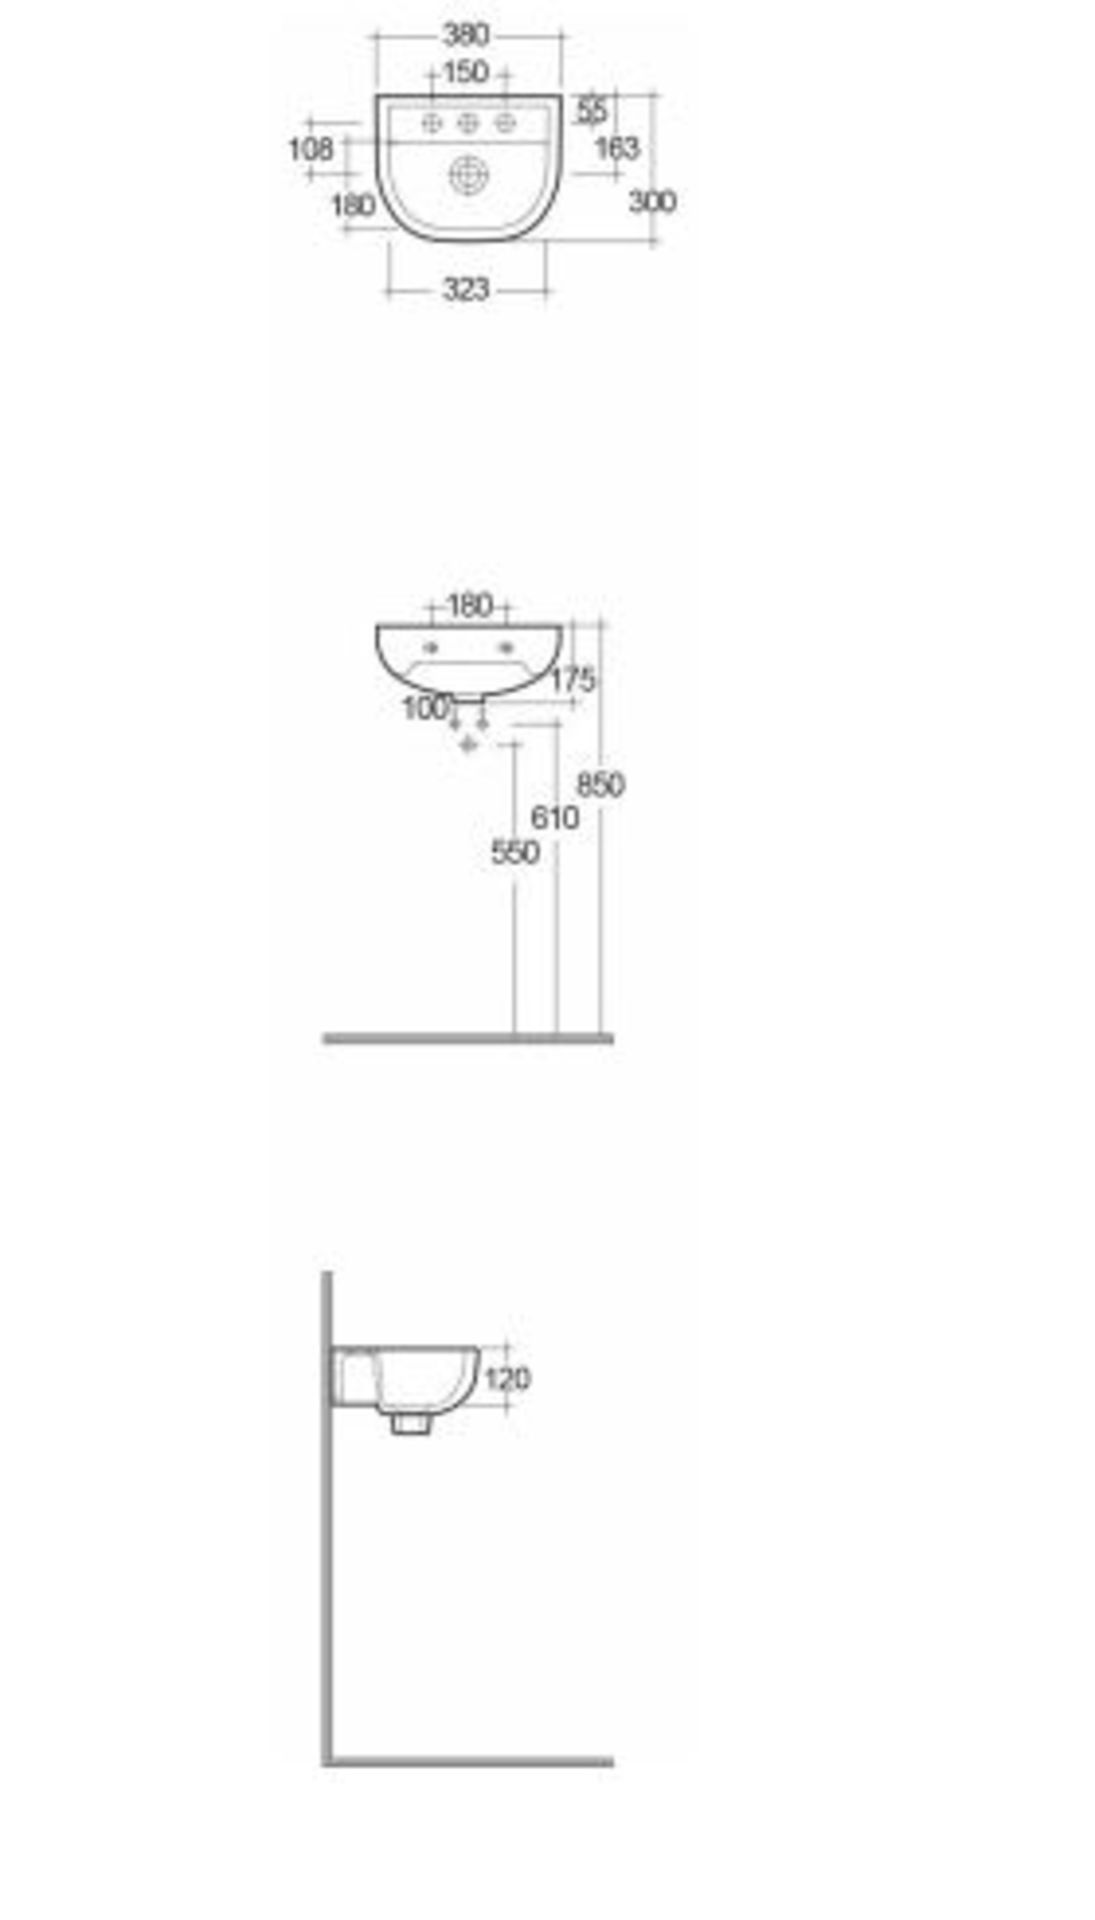 Rak Ceramics Rak Compact Wall Hung Basin Without Overflow - 380mm Wide - Side 1 Tap Hole - White - Image 3 of 4